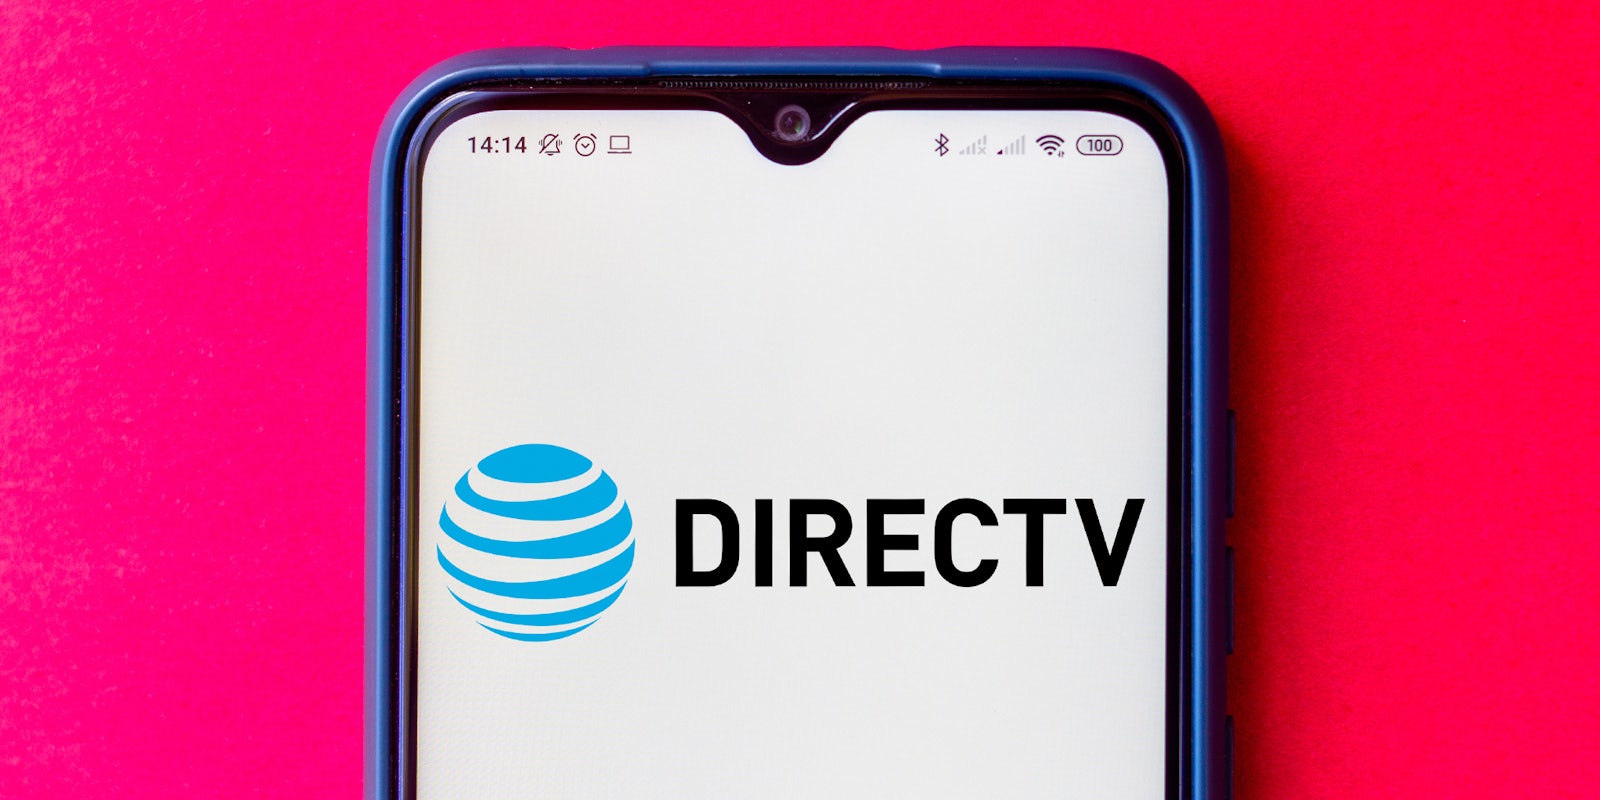 DIRECTV on phone screen in front of pink background